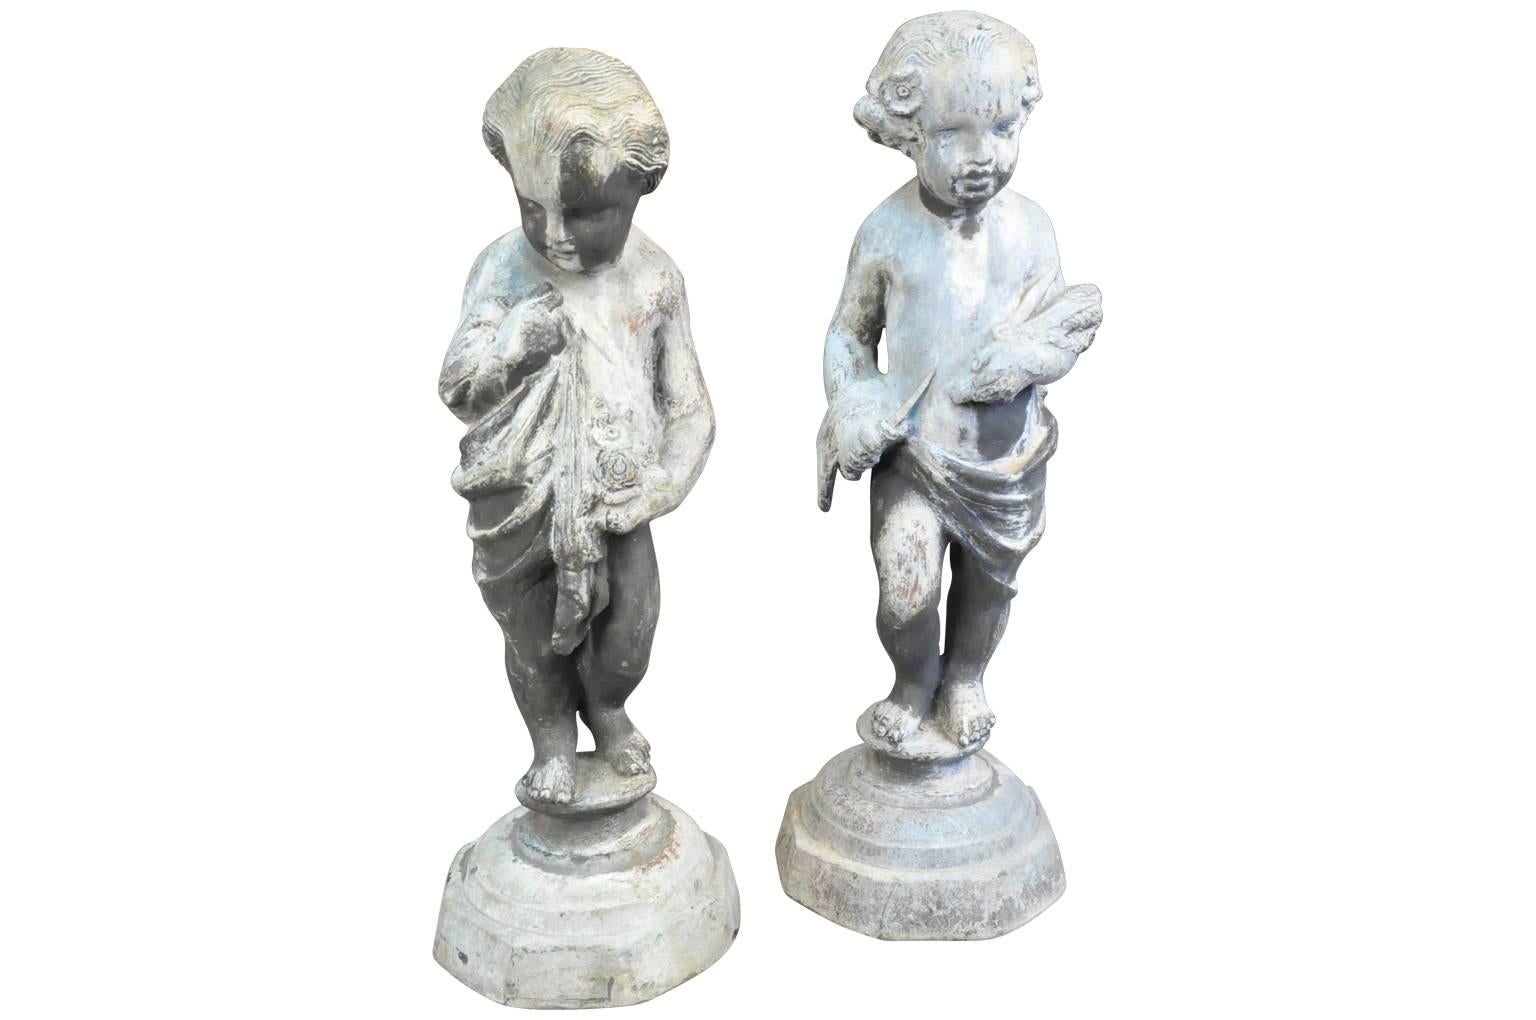 An outstanding complete set of the four seasons. Charming lead statues raised on sound bases. A fabulous addition to any garden or interior.